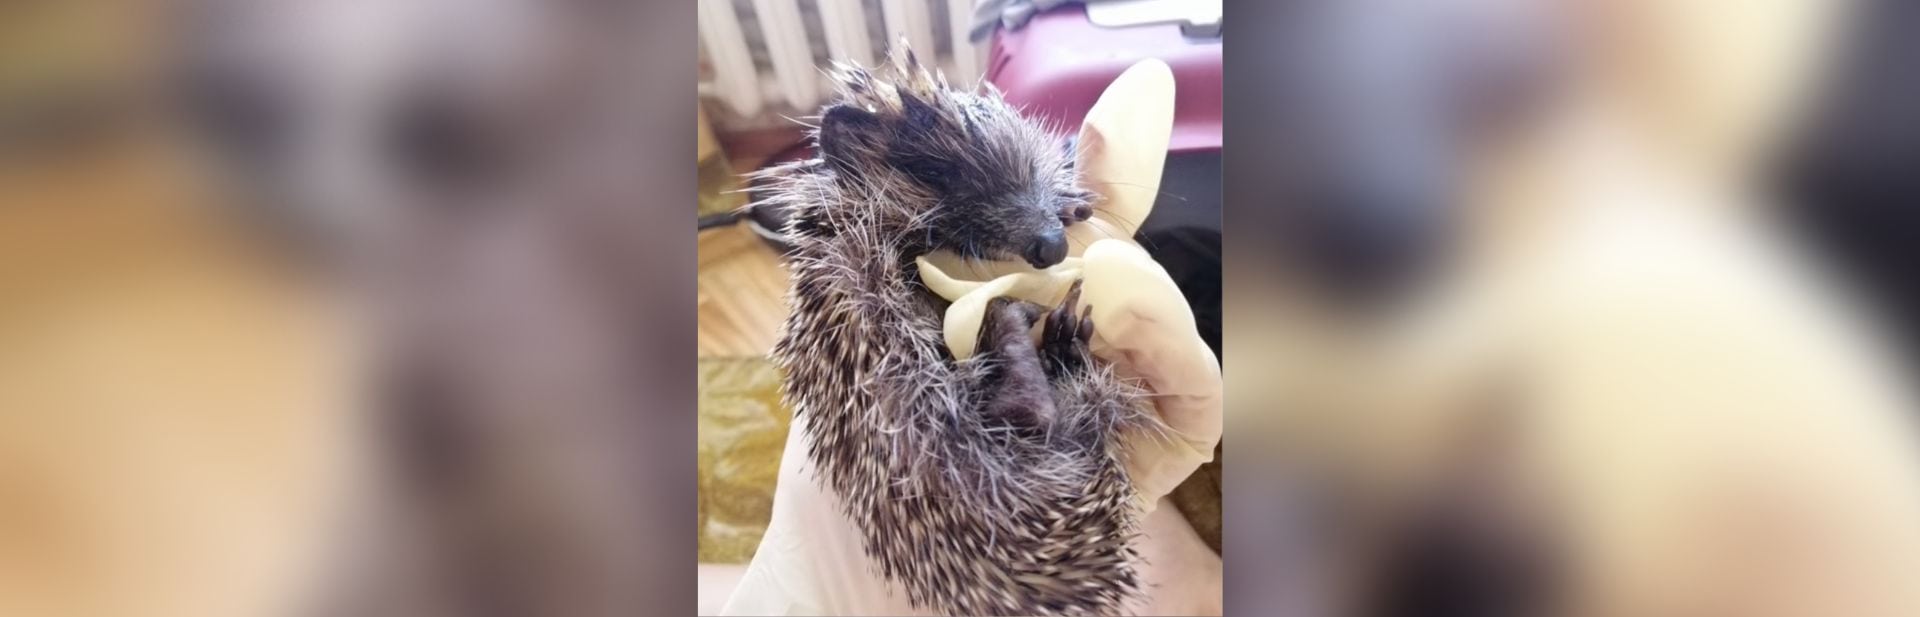 The Little Hedgehog That Stole a Woman’s Heart and Changed Her Life